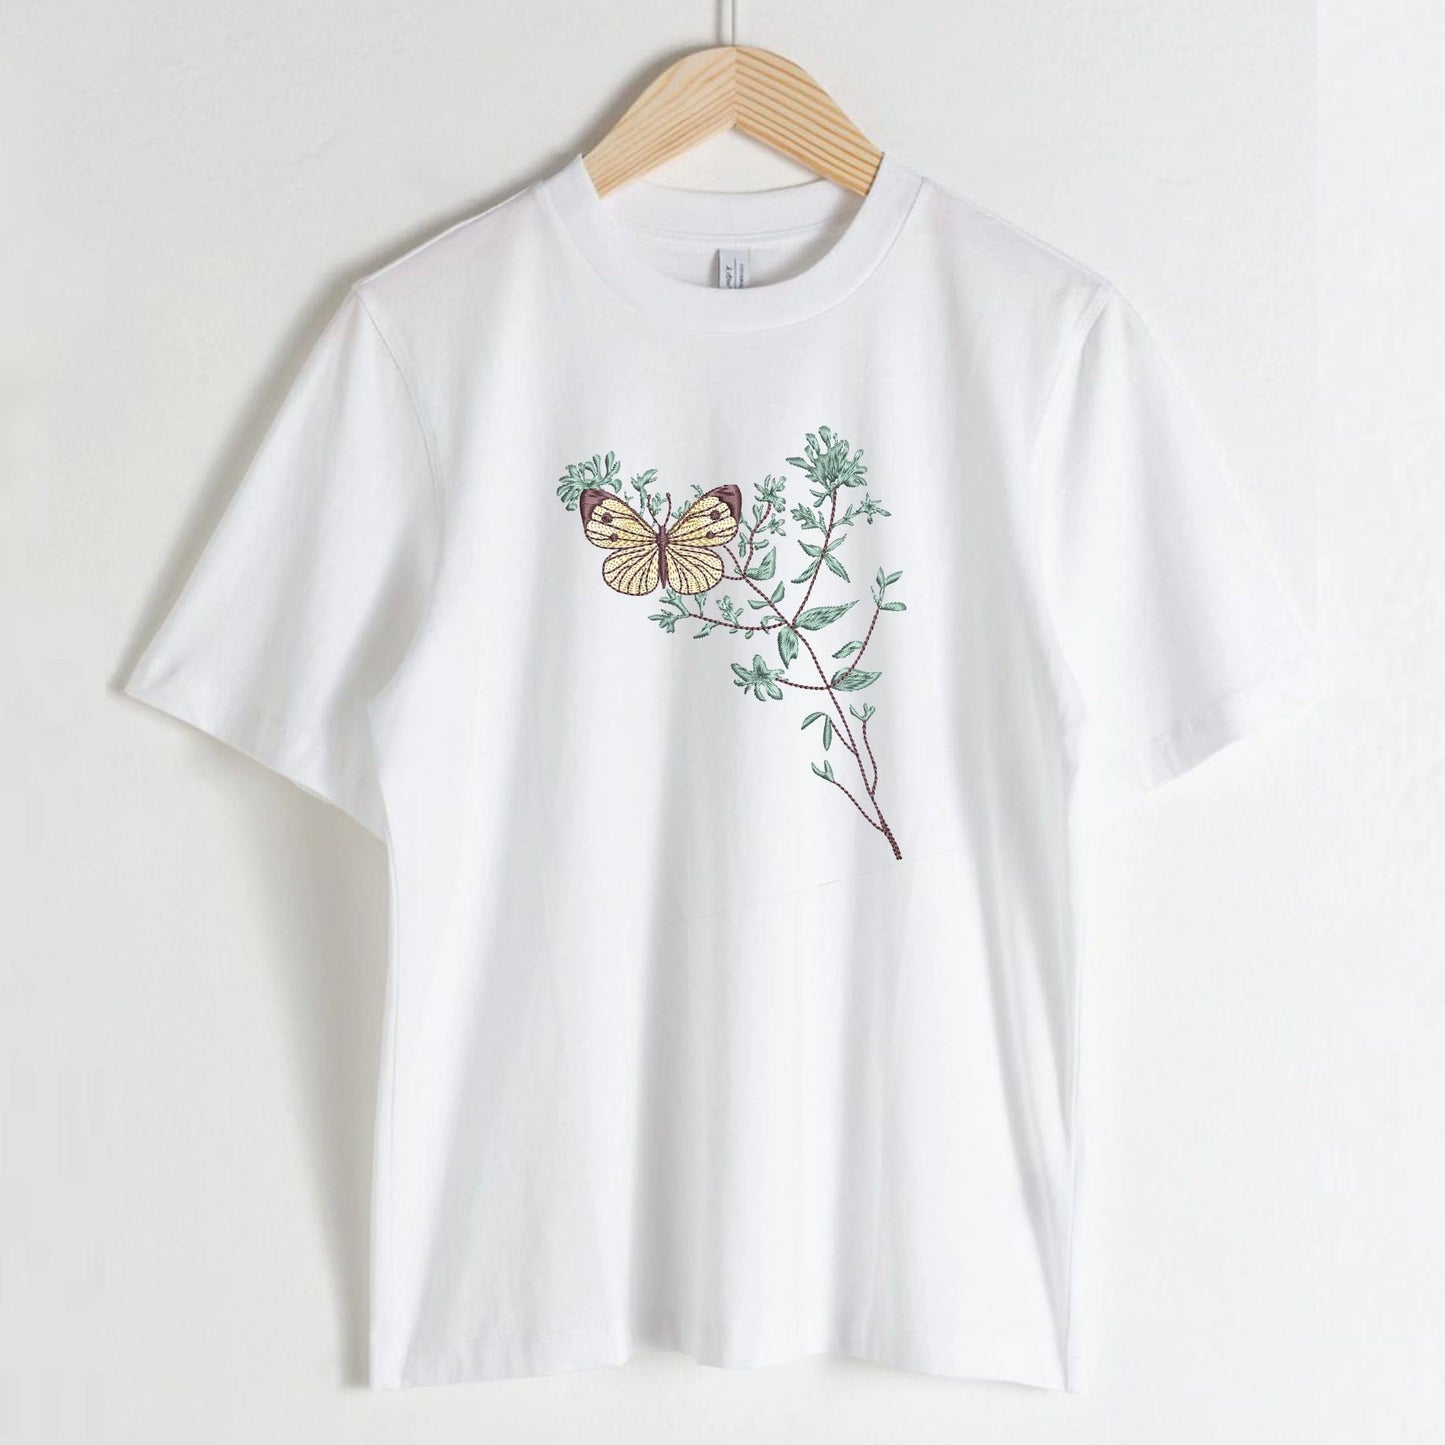 Vintage Flower Butterfly Machine Embroidery Design on T-shirt